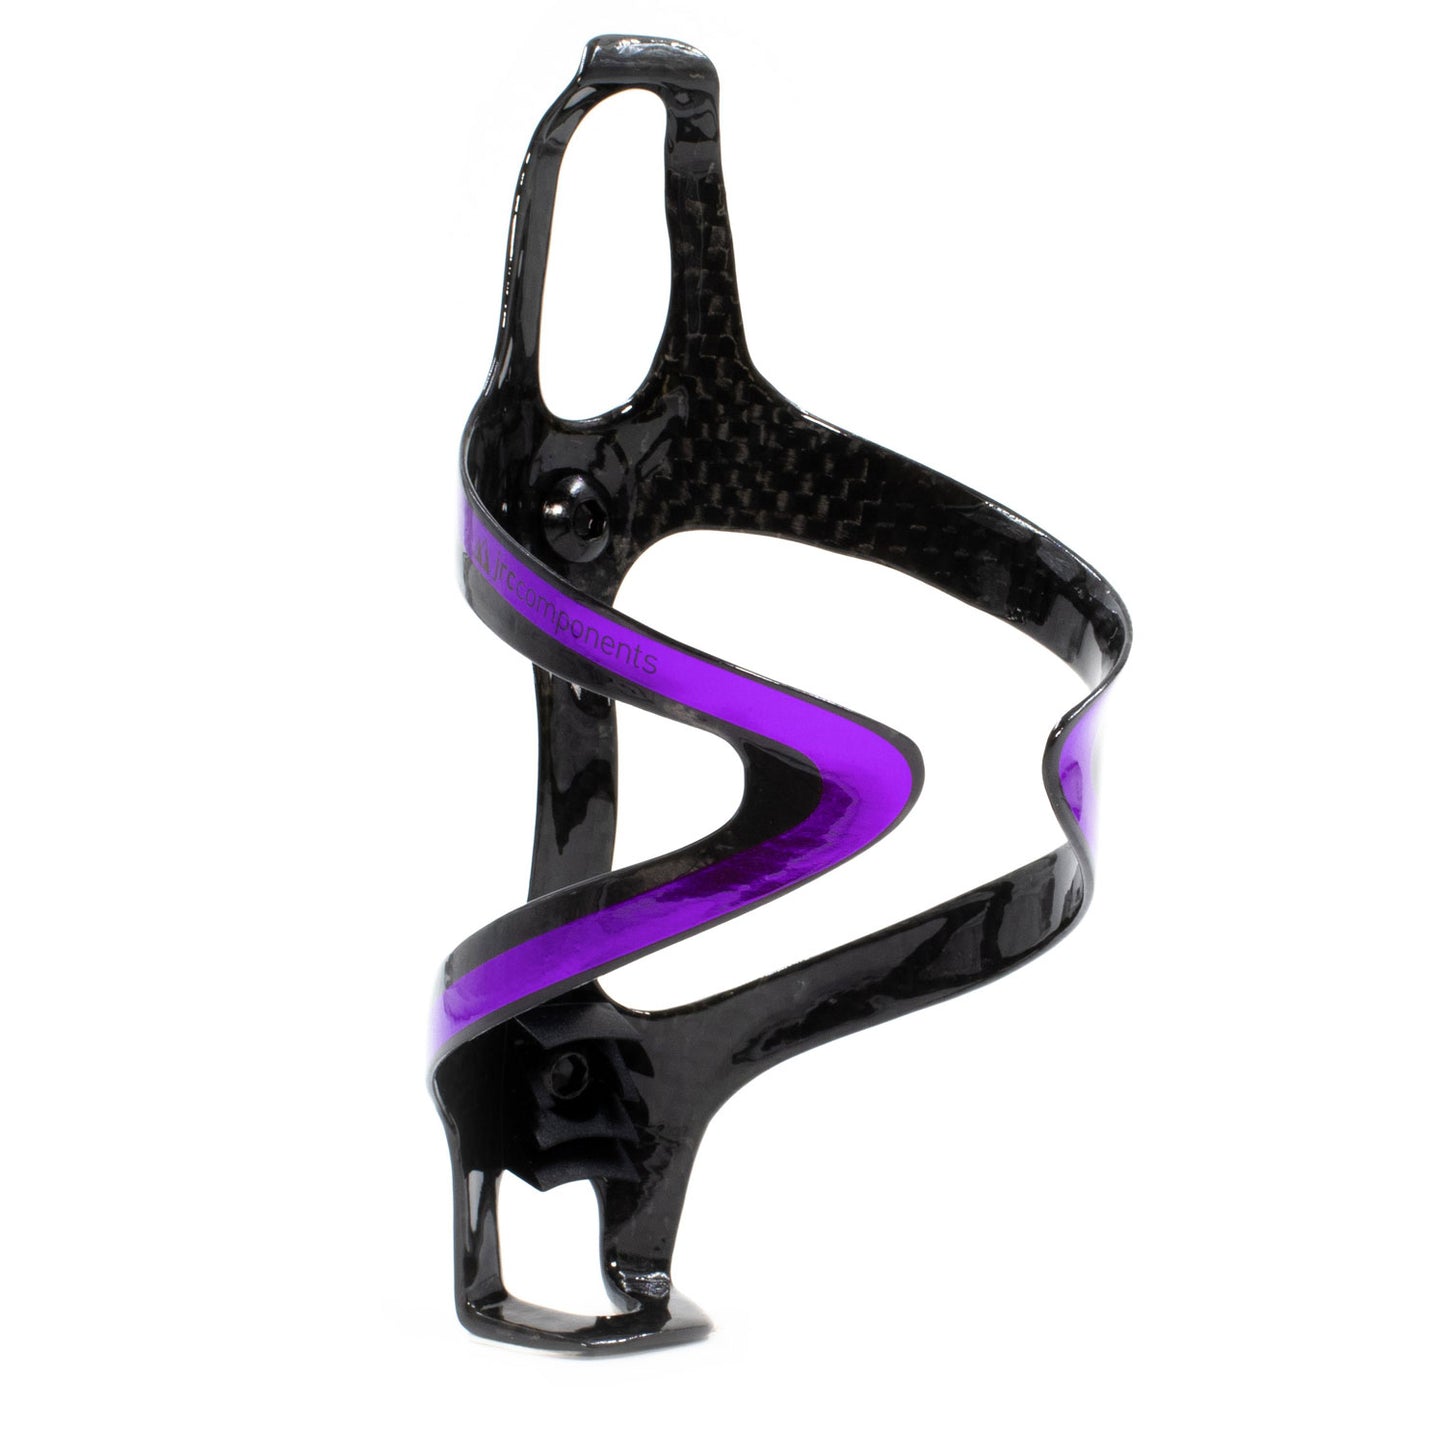 Purple, super lightweight carbon fibre bottle cages with a sleek gloss finish